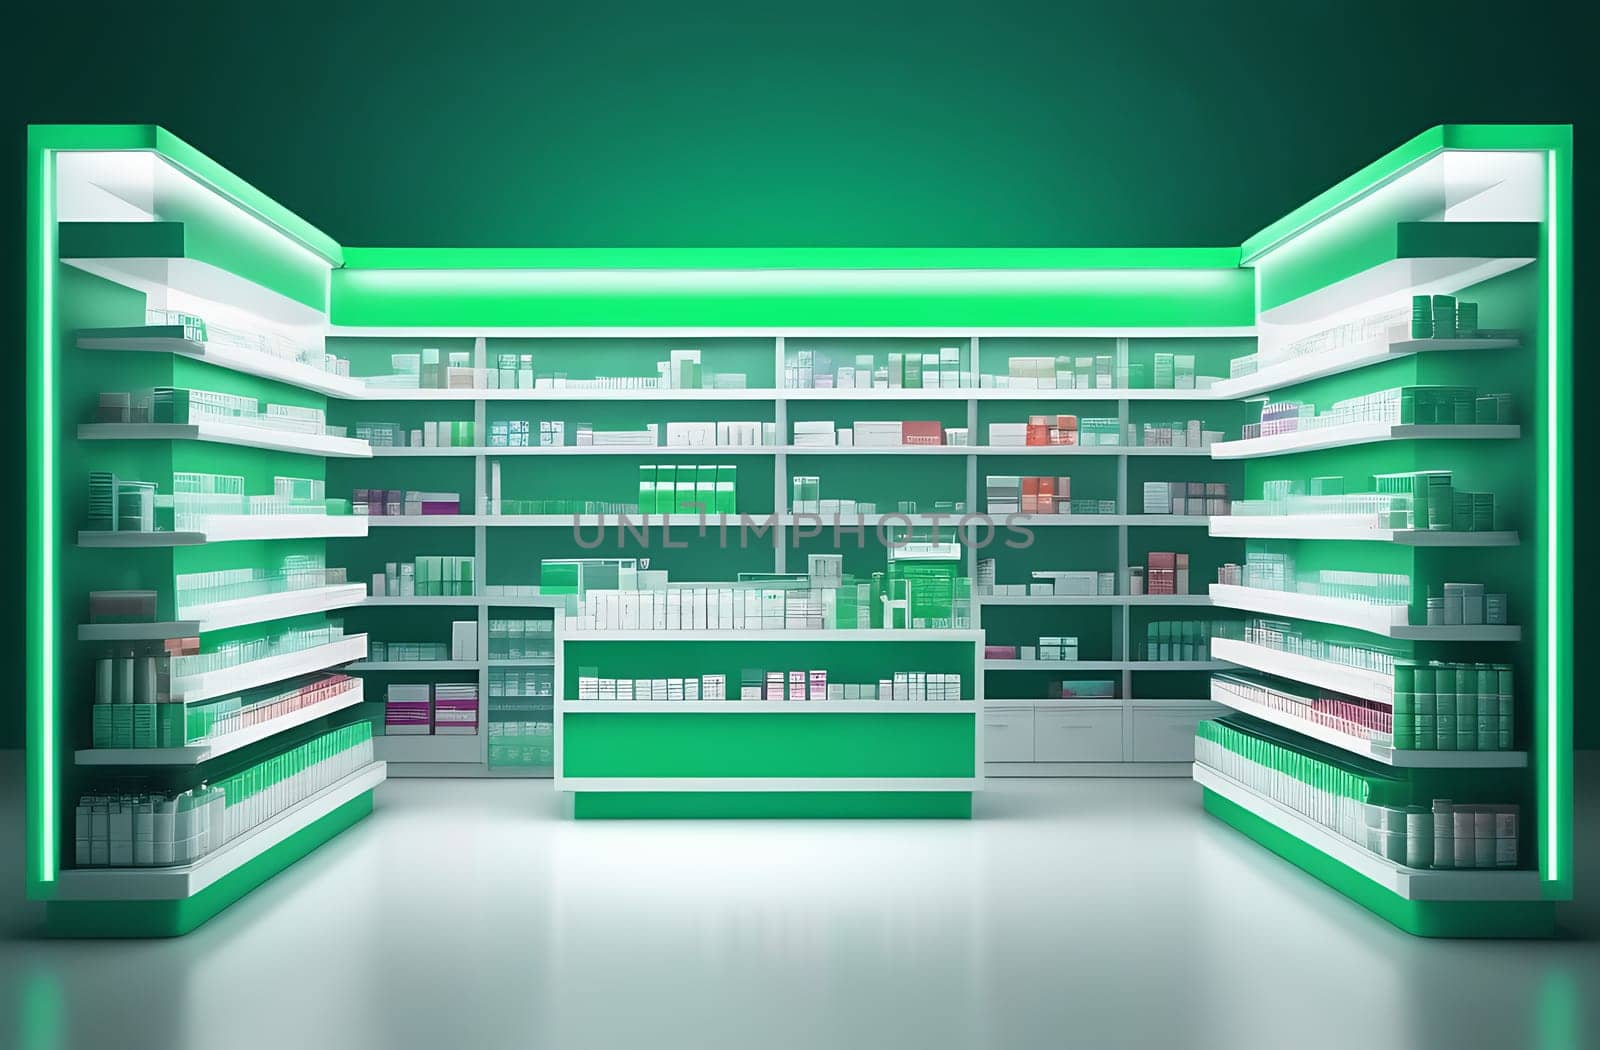 A modern pharmacy with a minimalistic design, shelves with medicines, pharmacy background. Blurred medicines on the shelves inside the pharmacy.